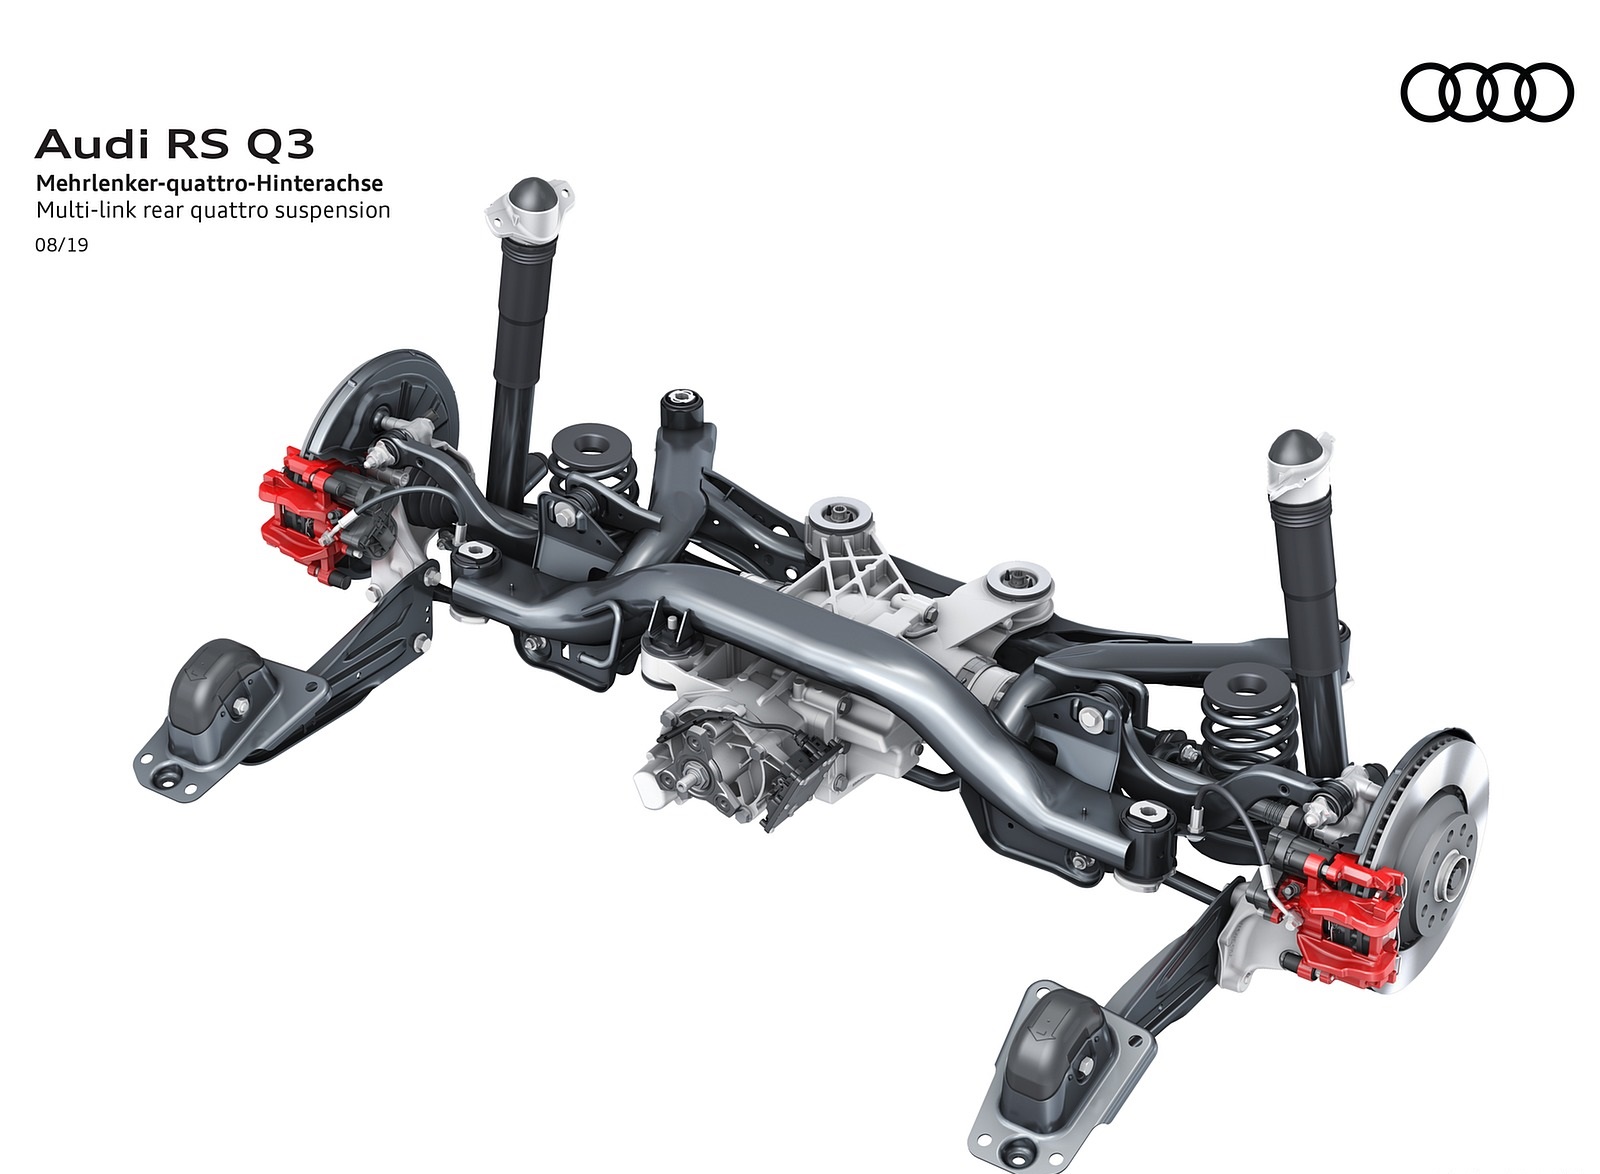 2020 Audi Rs Q3 Multi Link Rear Quattro Suspension Wallpapers 109 Newcarcars